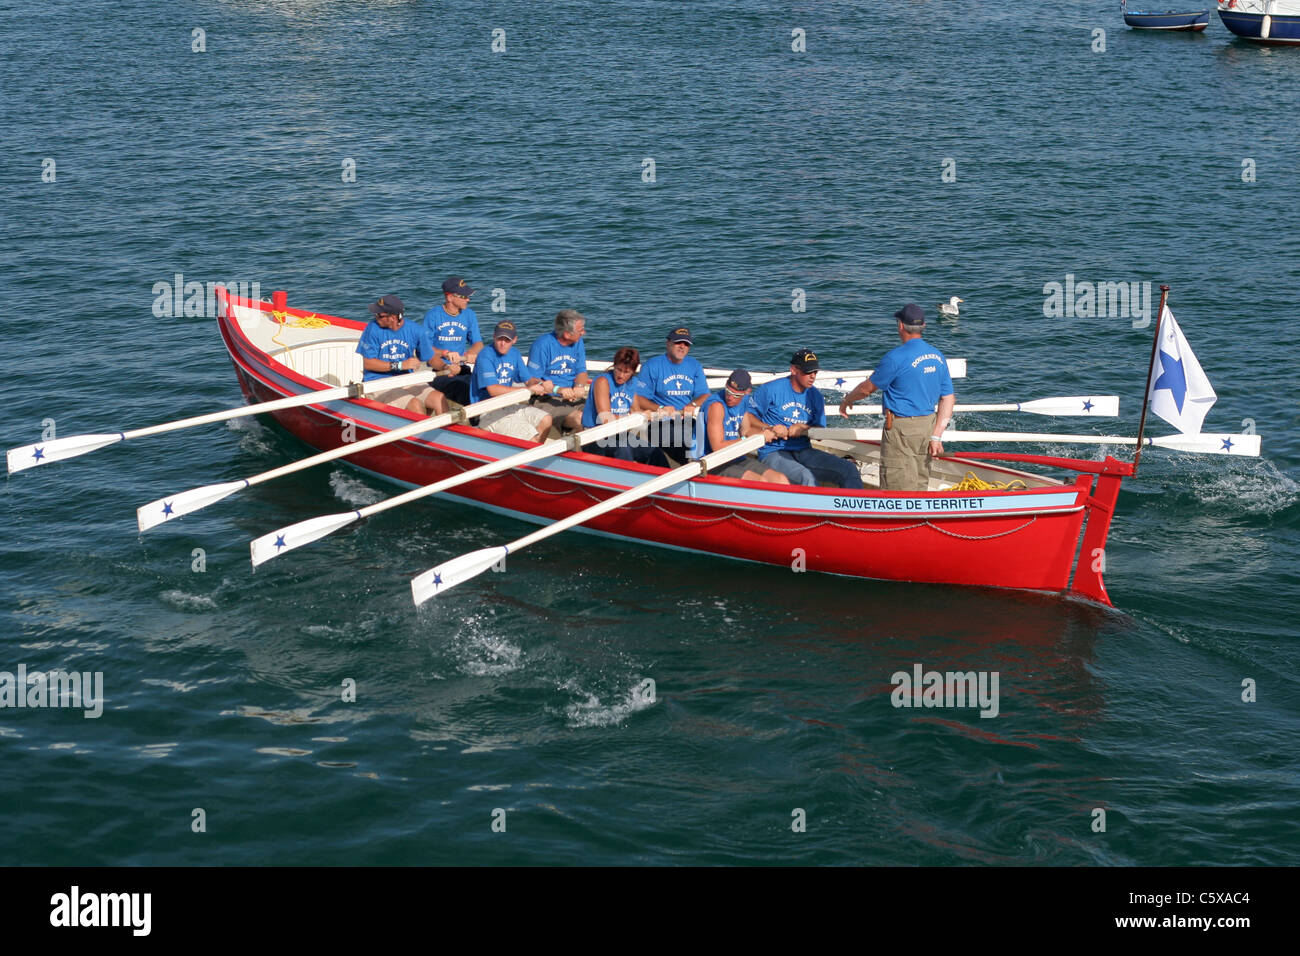 Swiss boat 'Sauvetage de Territet', mairitme event in Douarnenez (Brittany, France). Stock Photo